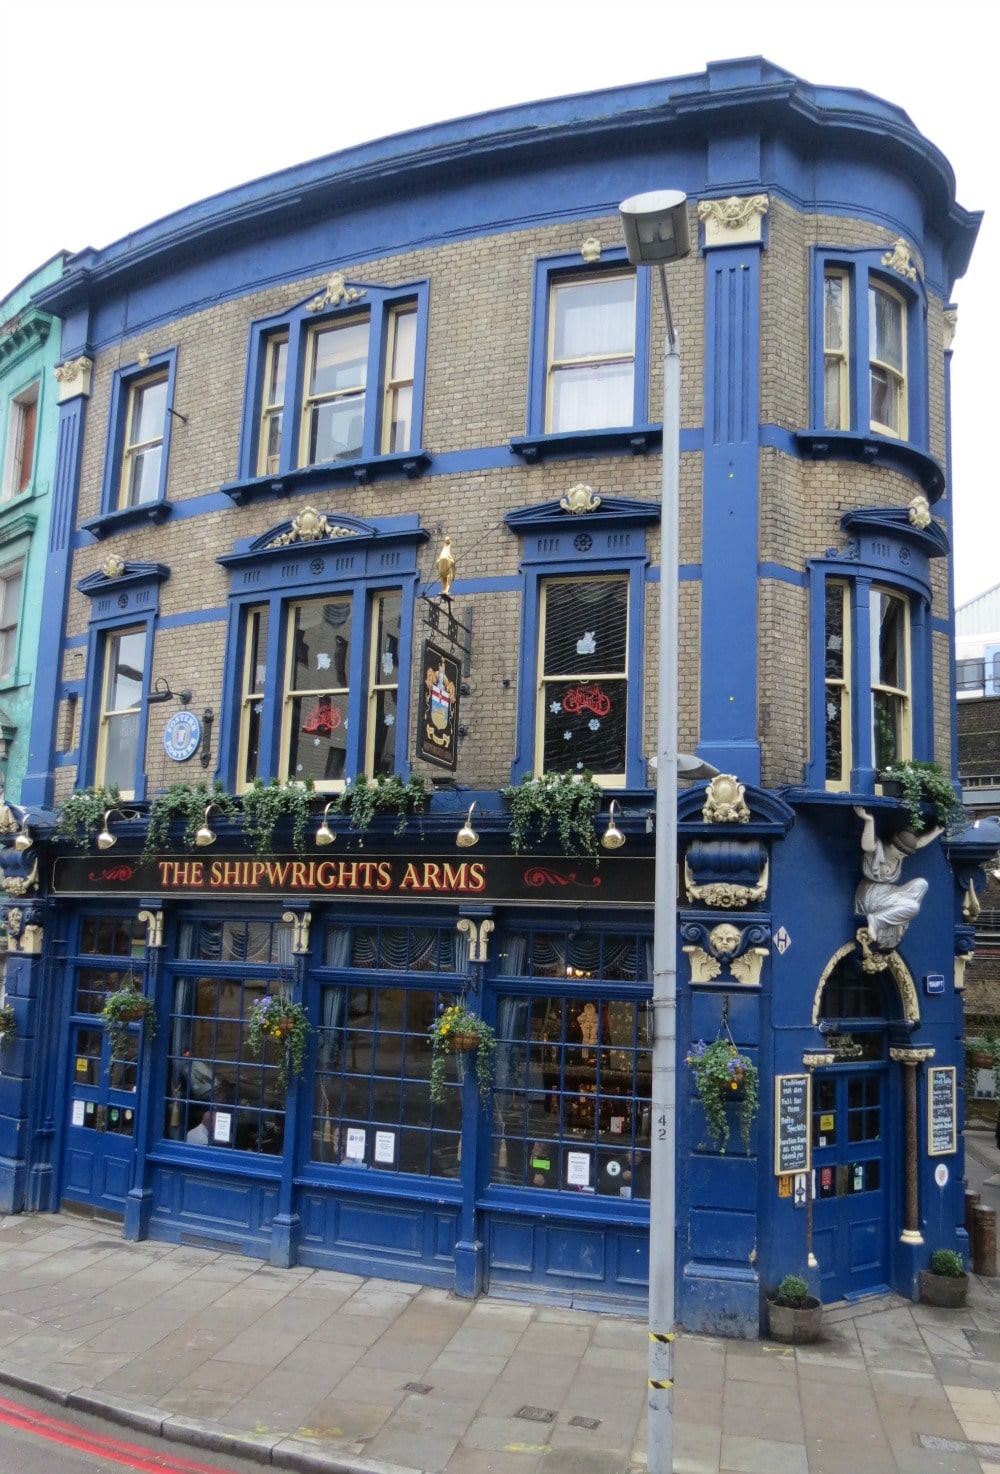 Baby Boomer Travel | England | The Shipwright's Arms Pub